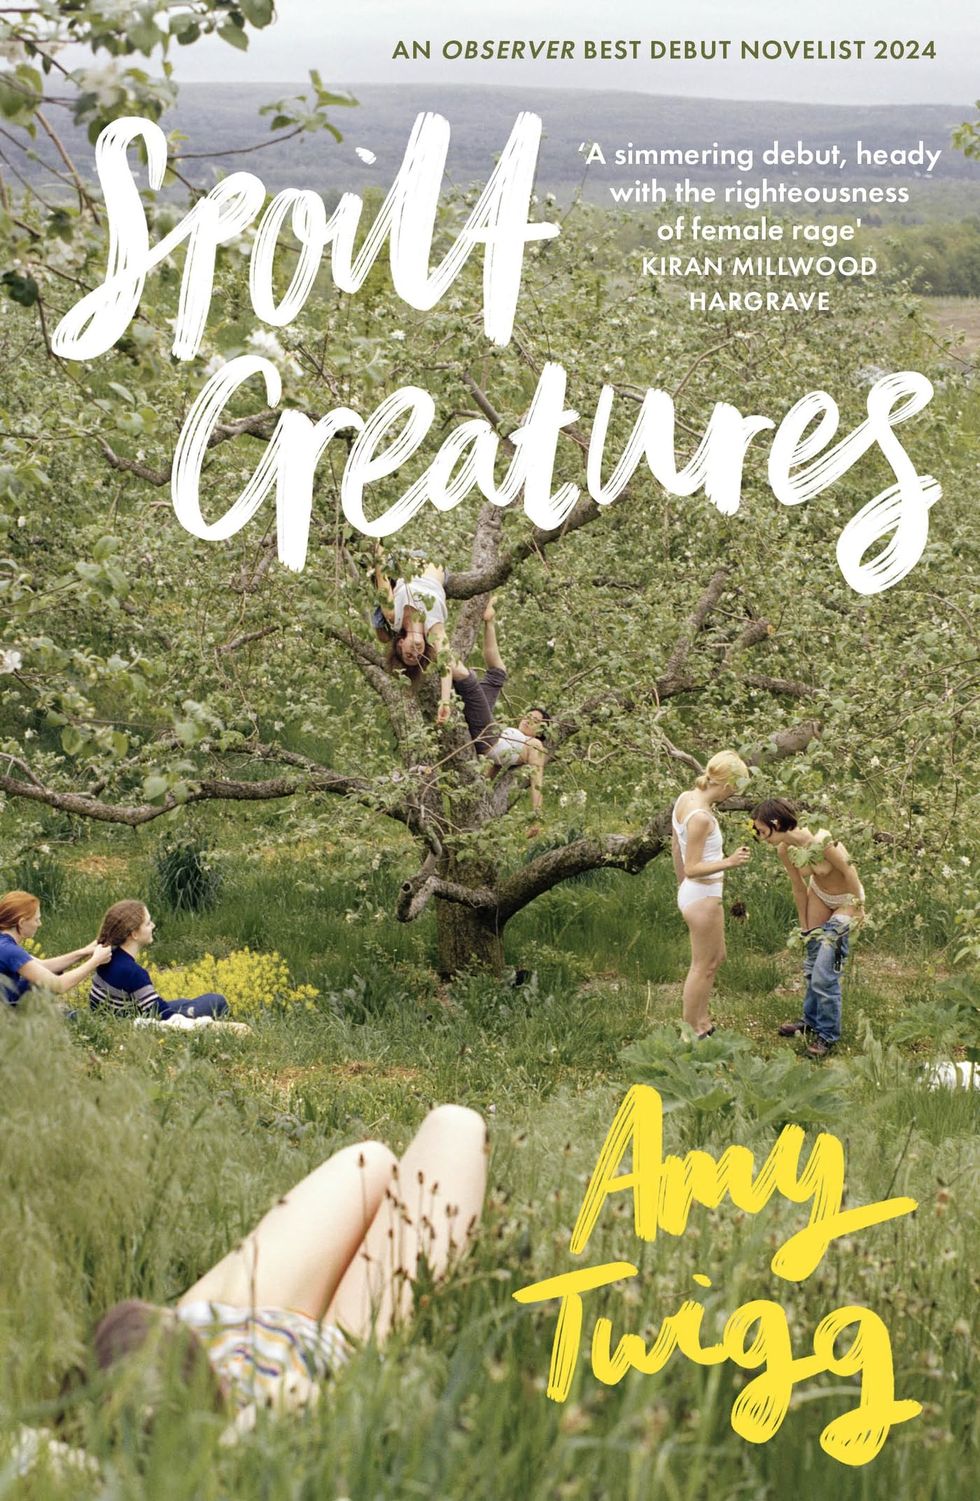 Spoilt Creatures by Amy Twigg